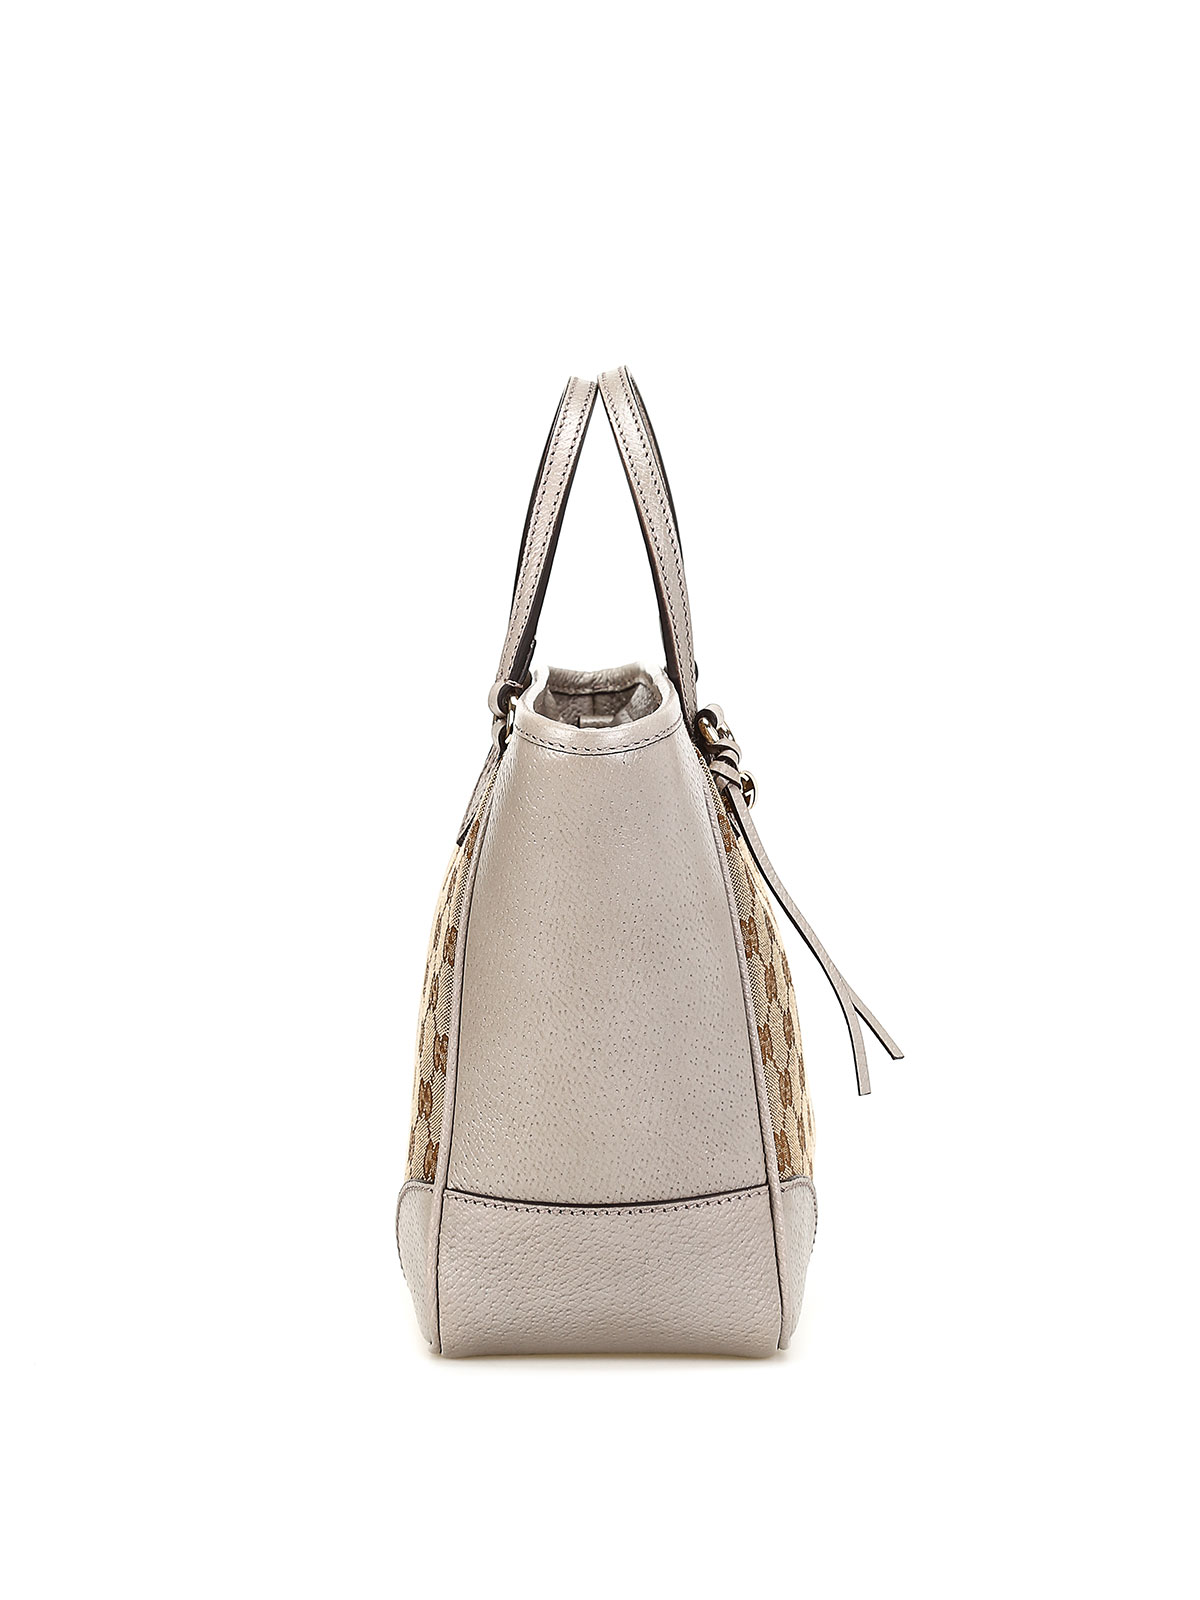 Gucci - Authenticated Bree Handbag - Cloth Beige for Women, Never Worn, with Tag